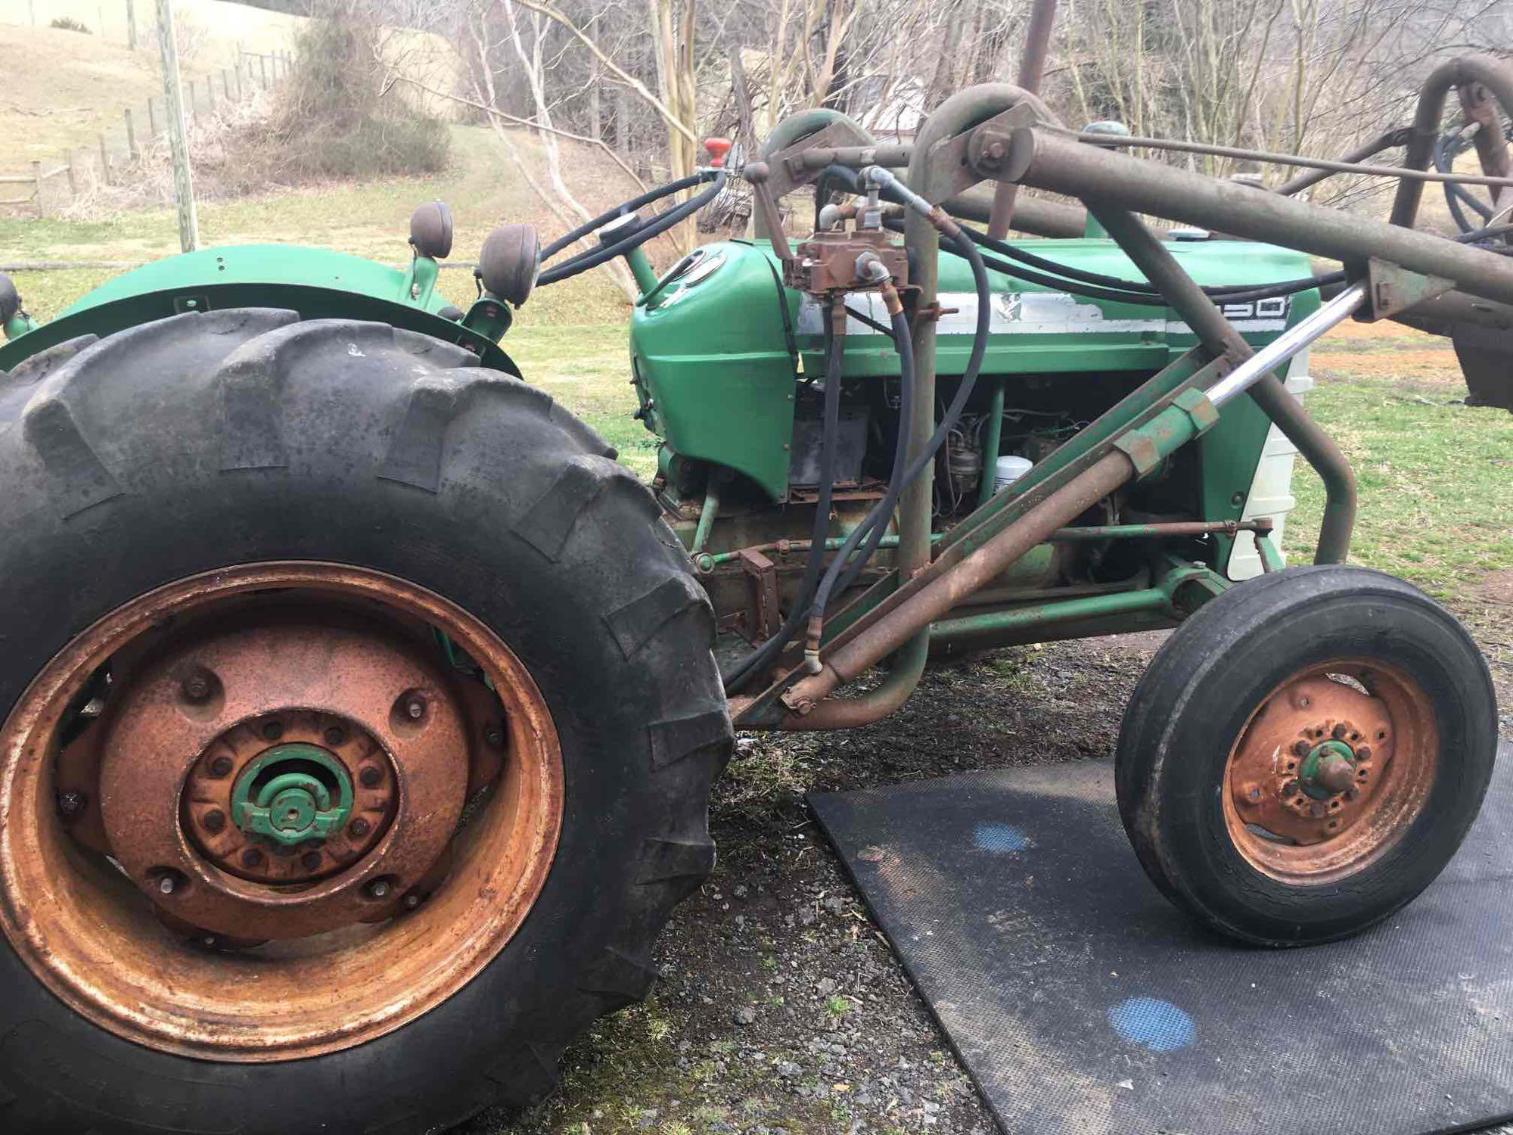 Image for 1958 Oliver 550 Tractor w/Loader, Gas, Runs out well per Seller. w/Set of Rear Tire Chains